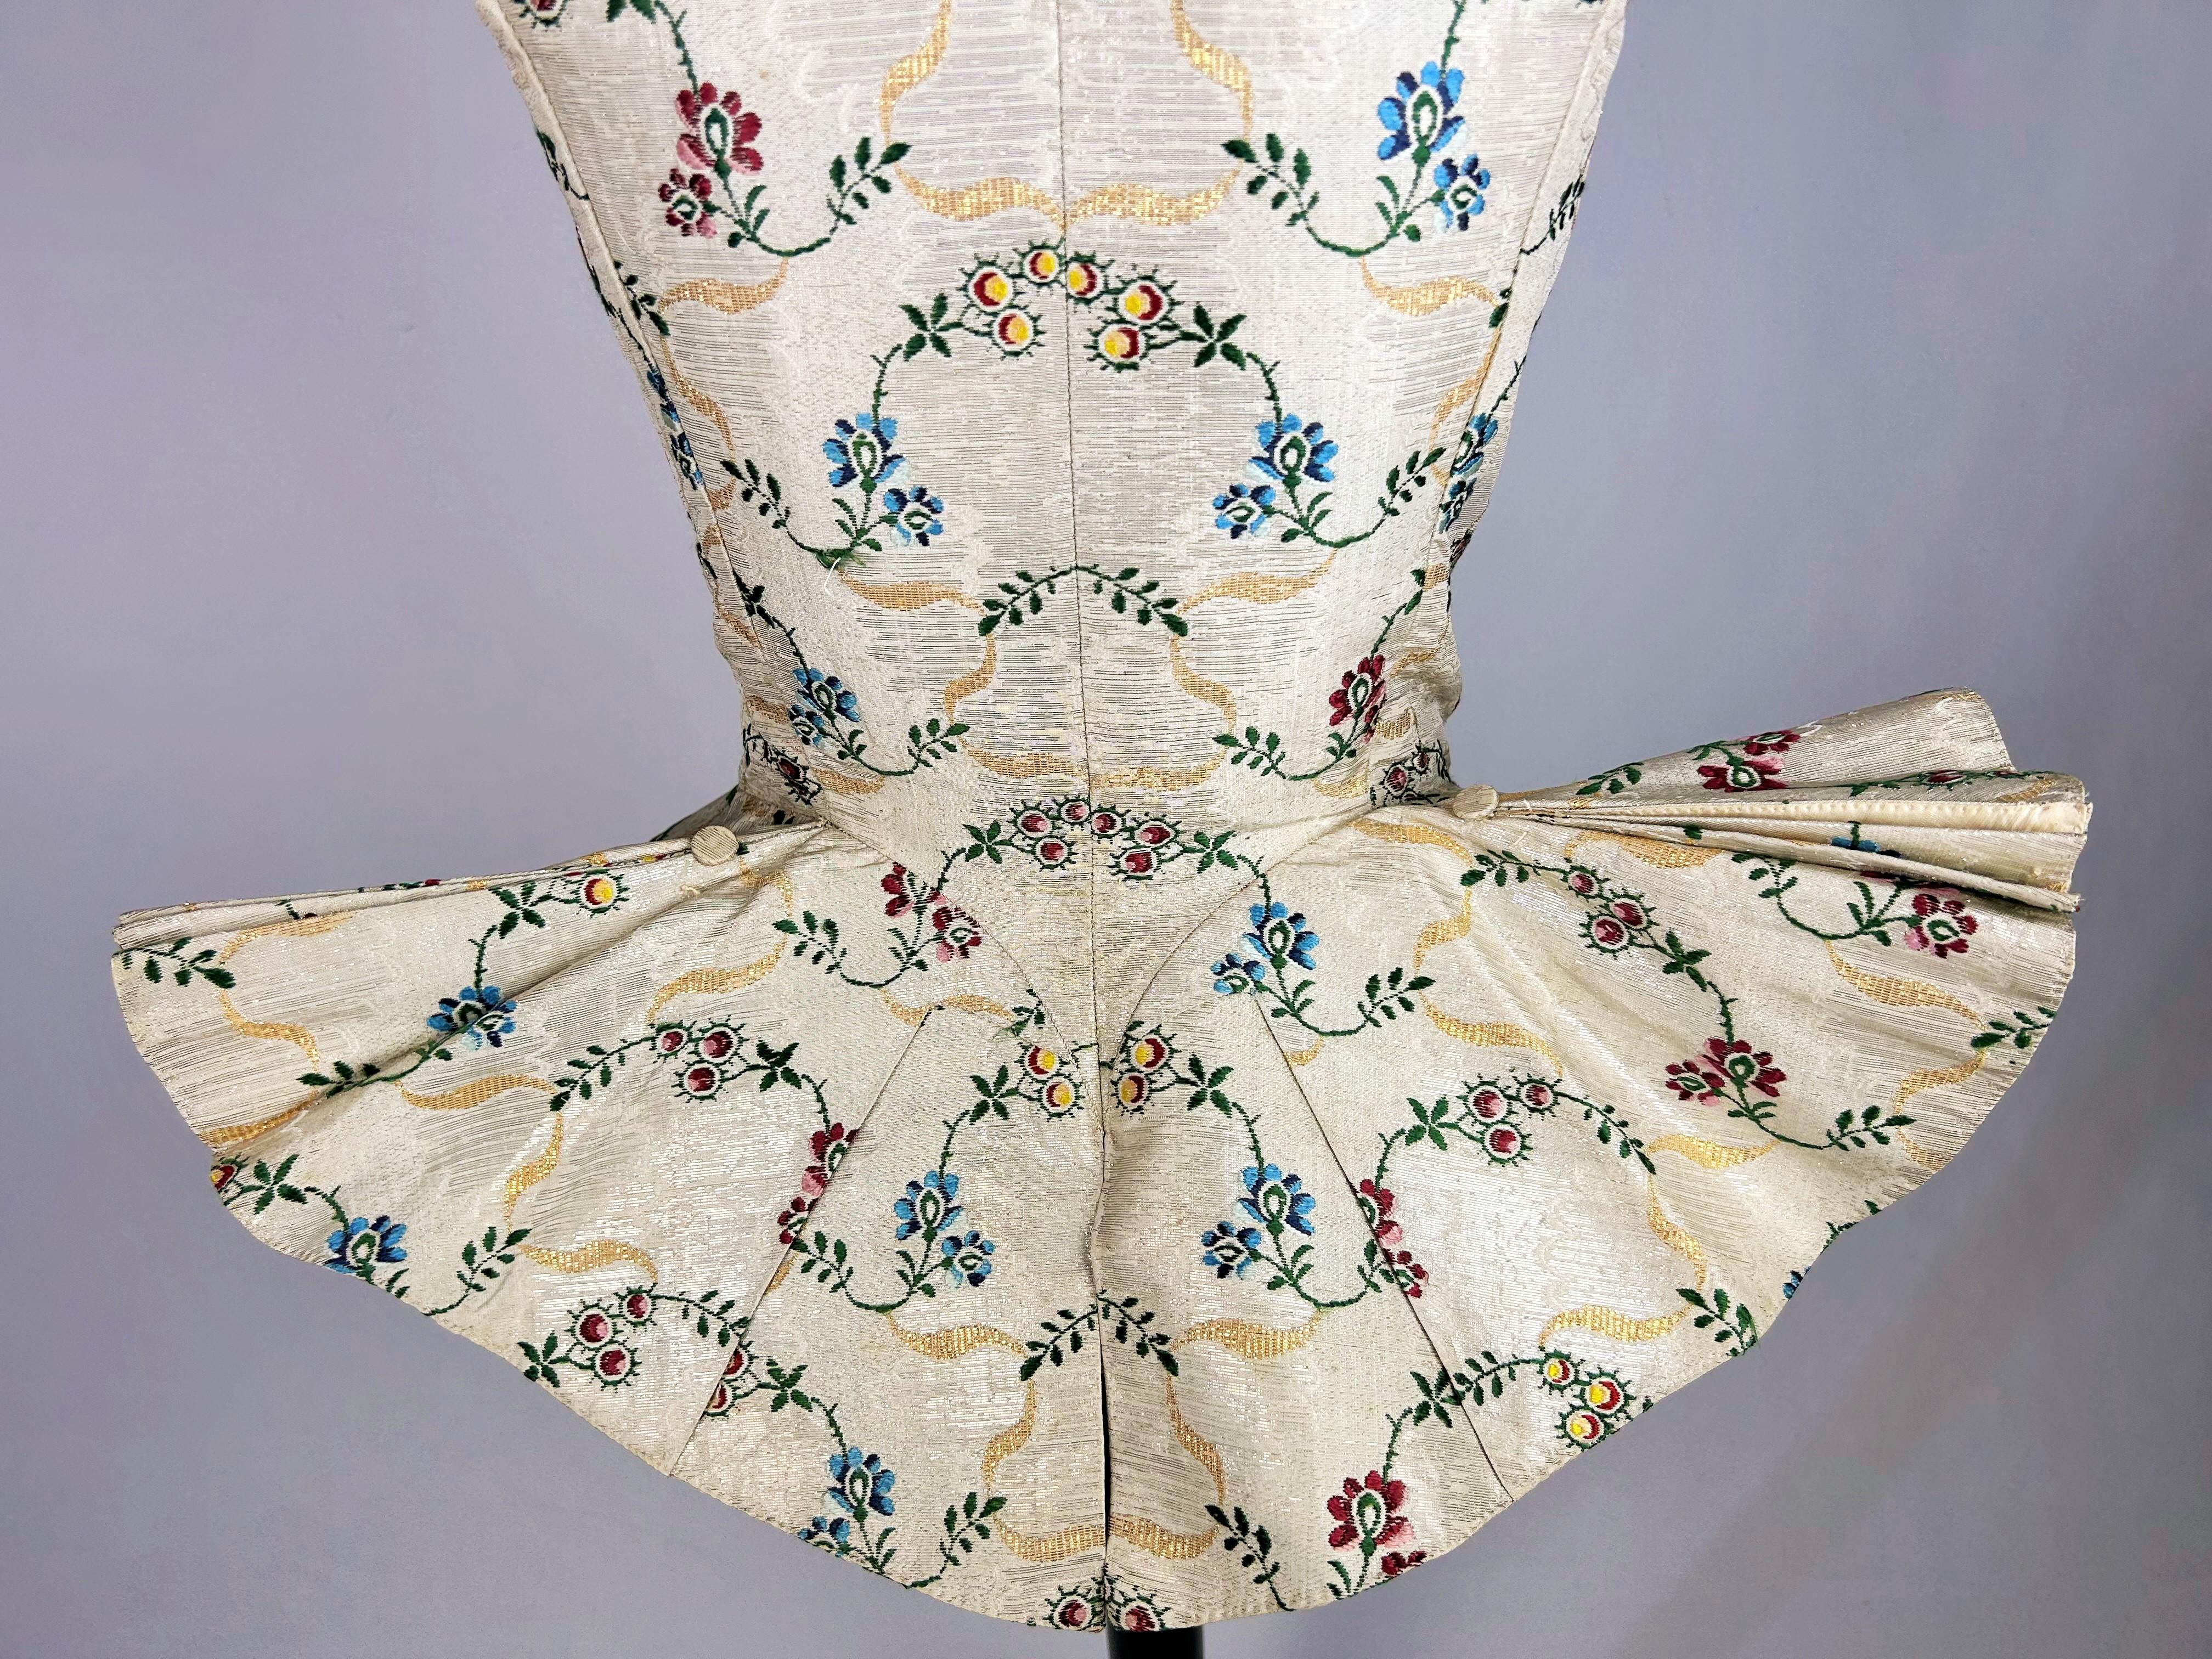 Circa 1750
England or Europe

Sleeveless bodice and long pleated basques in silver cloth, lampas in silver thread. Rich polychrome silk brocade with wood berry design and undulating scrolls of gold thread. Skilfully tailored with long pleated